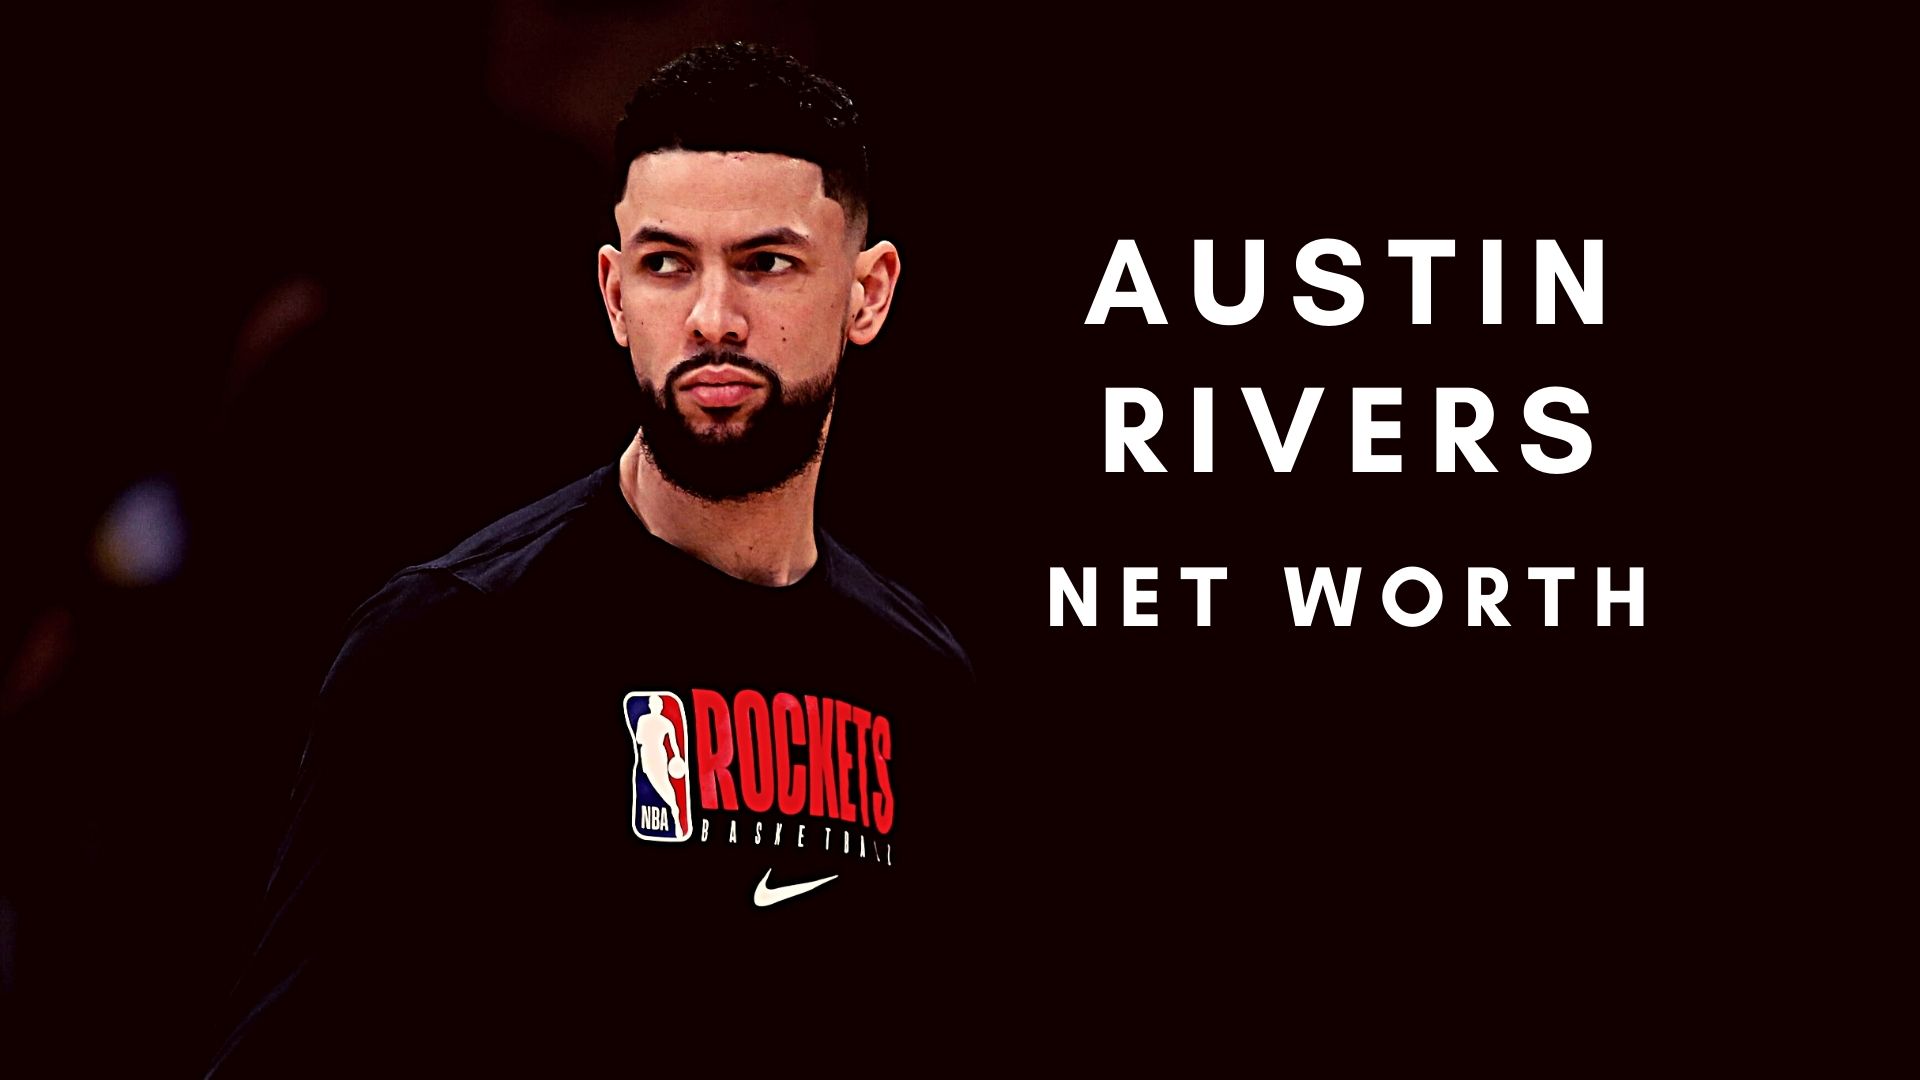 Austin Rivers 2021 Net Worth, Salary, Records, and Endorsements